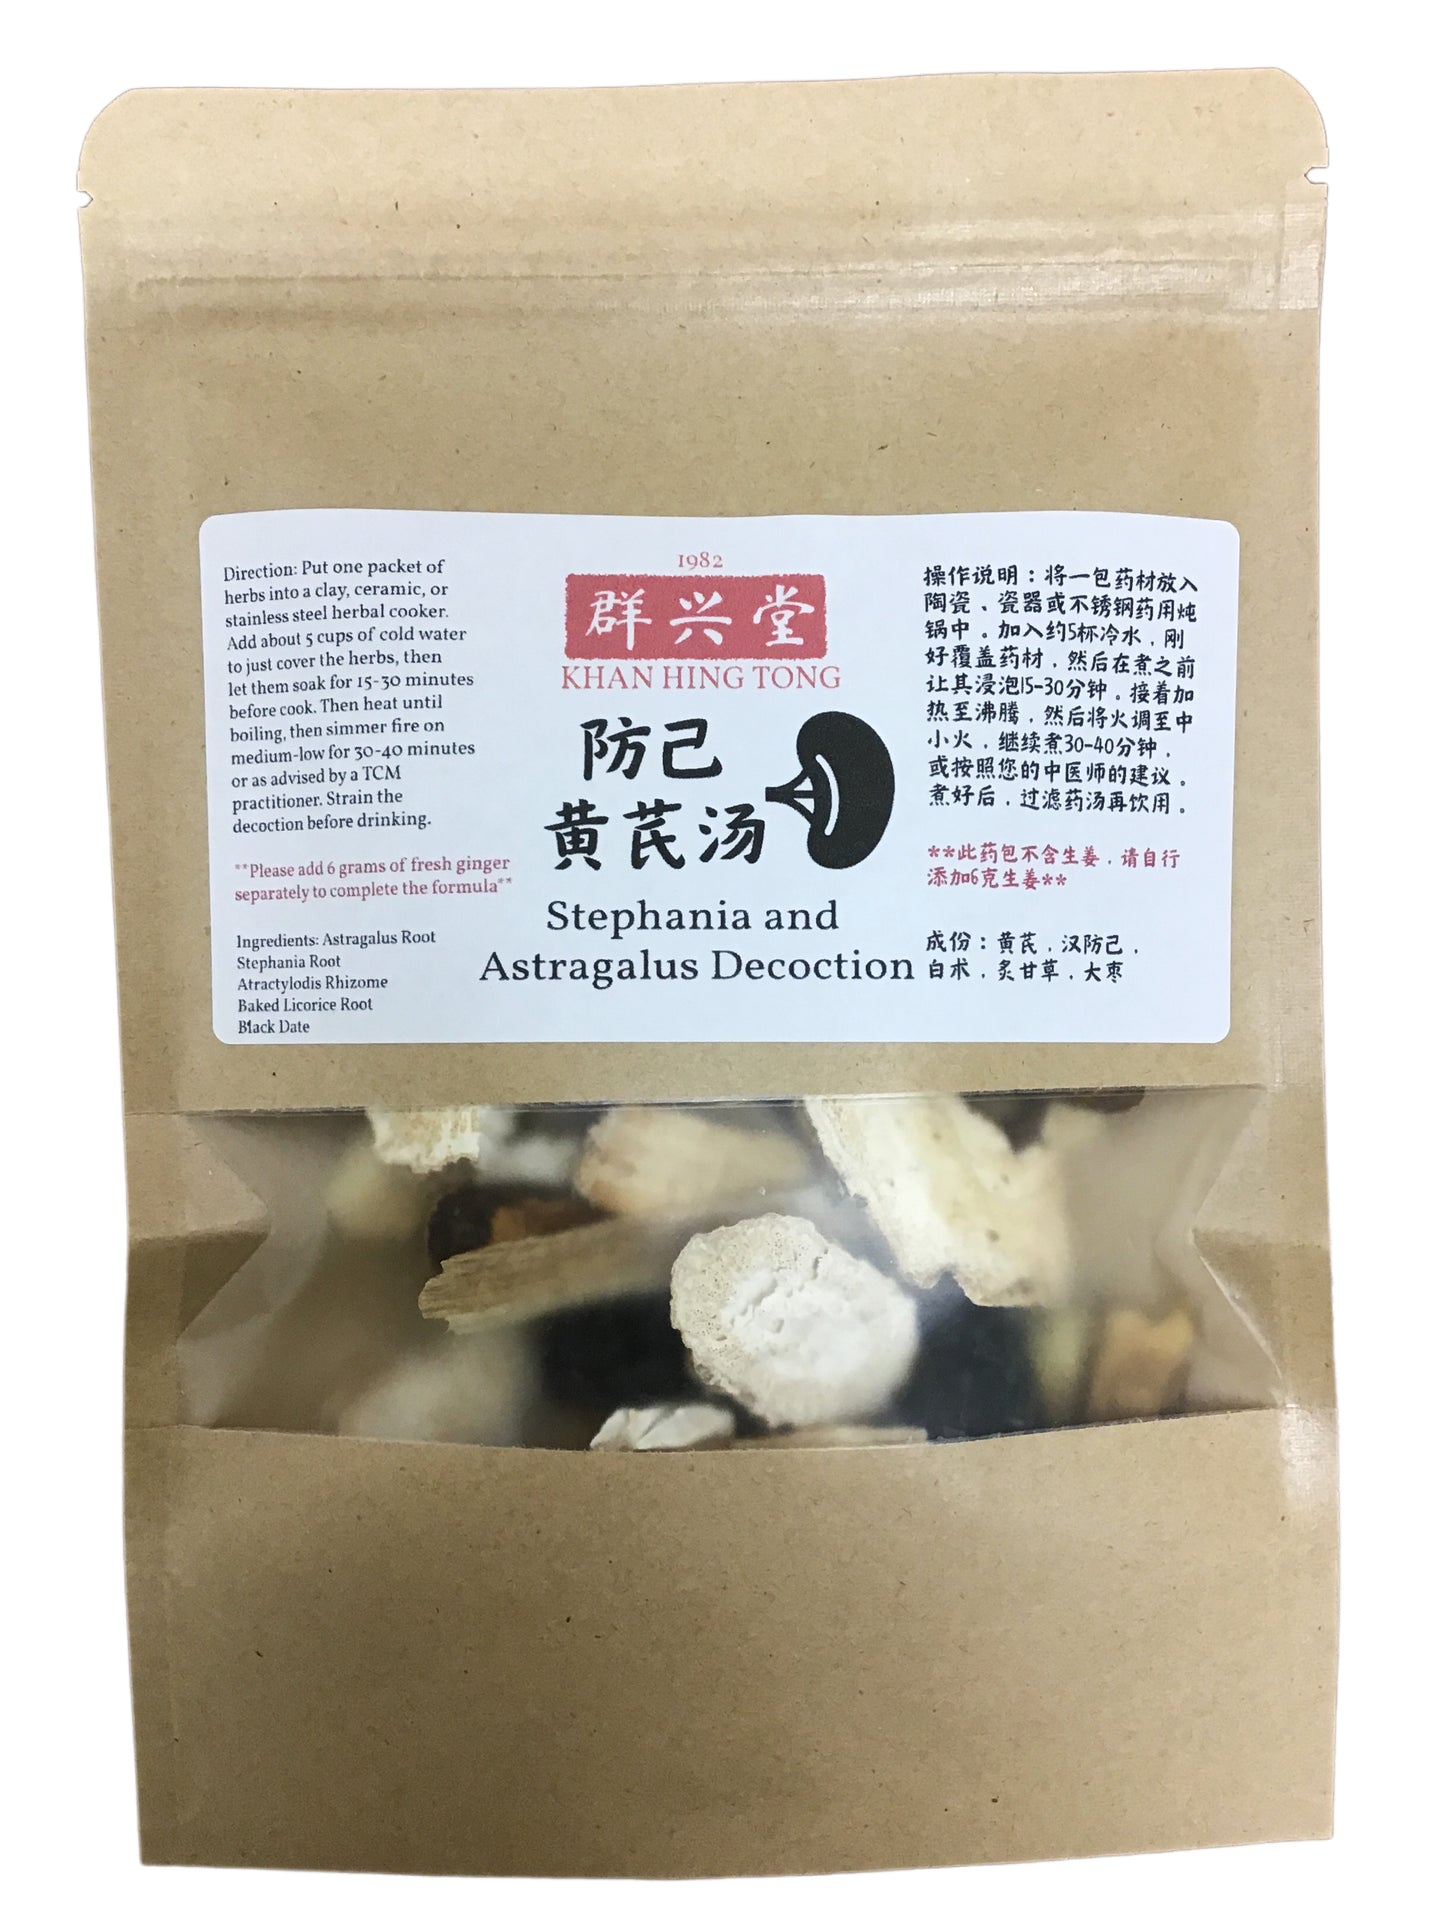 Stephania and Astragalus Decoction 防己黄芪汤